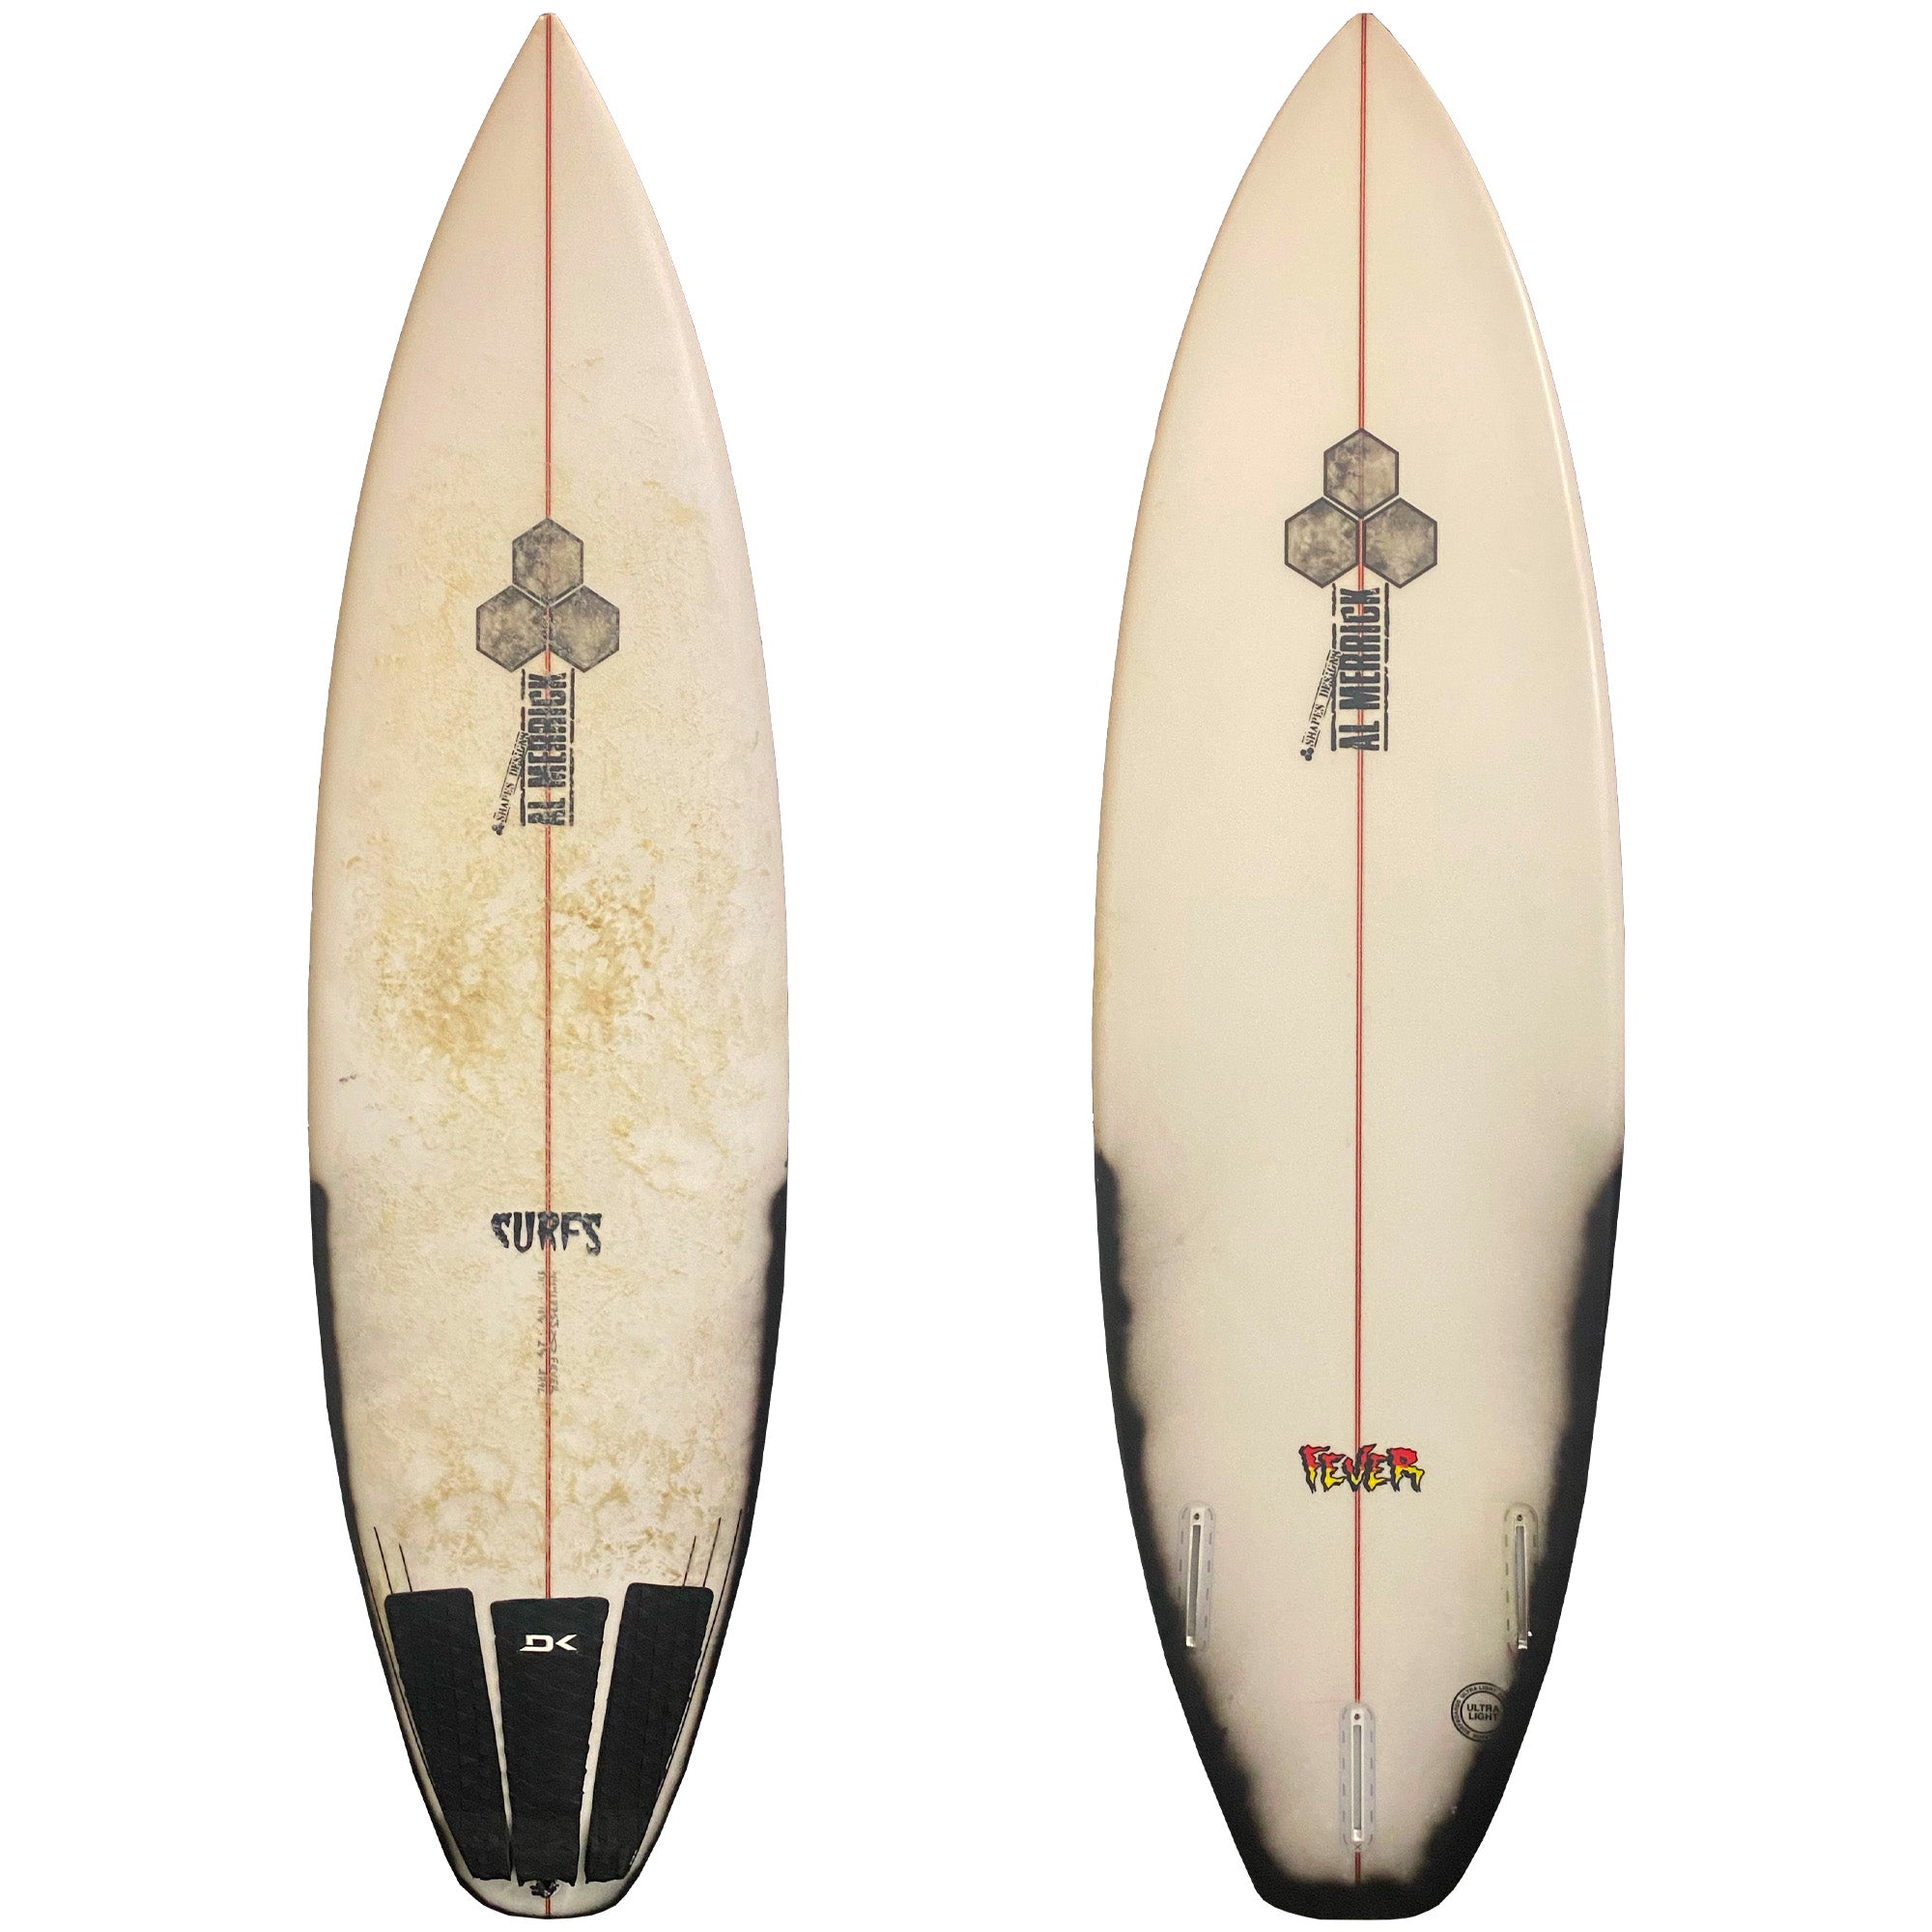 Channel Islands Fever 5'11 Consignment Surfboard